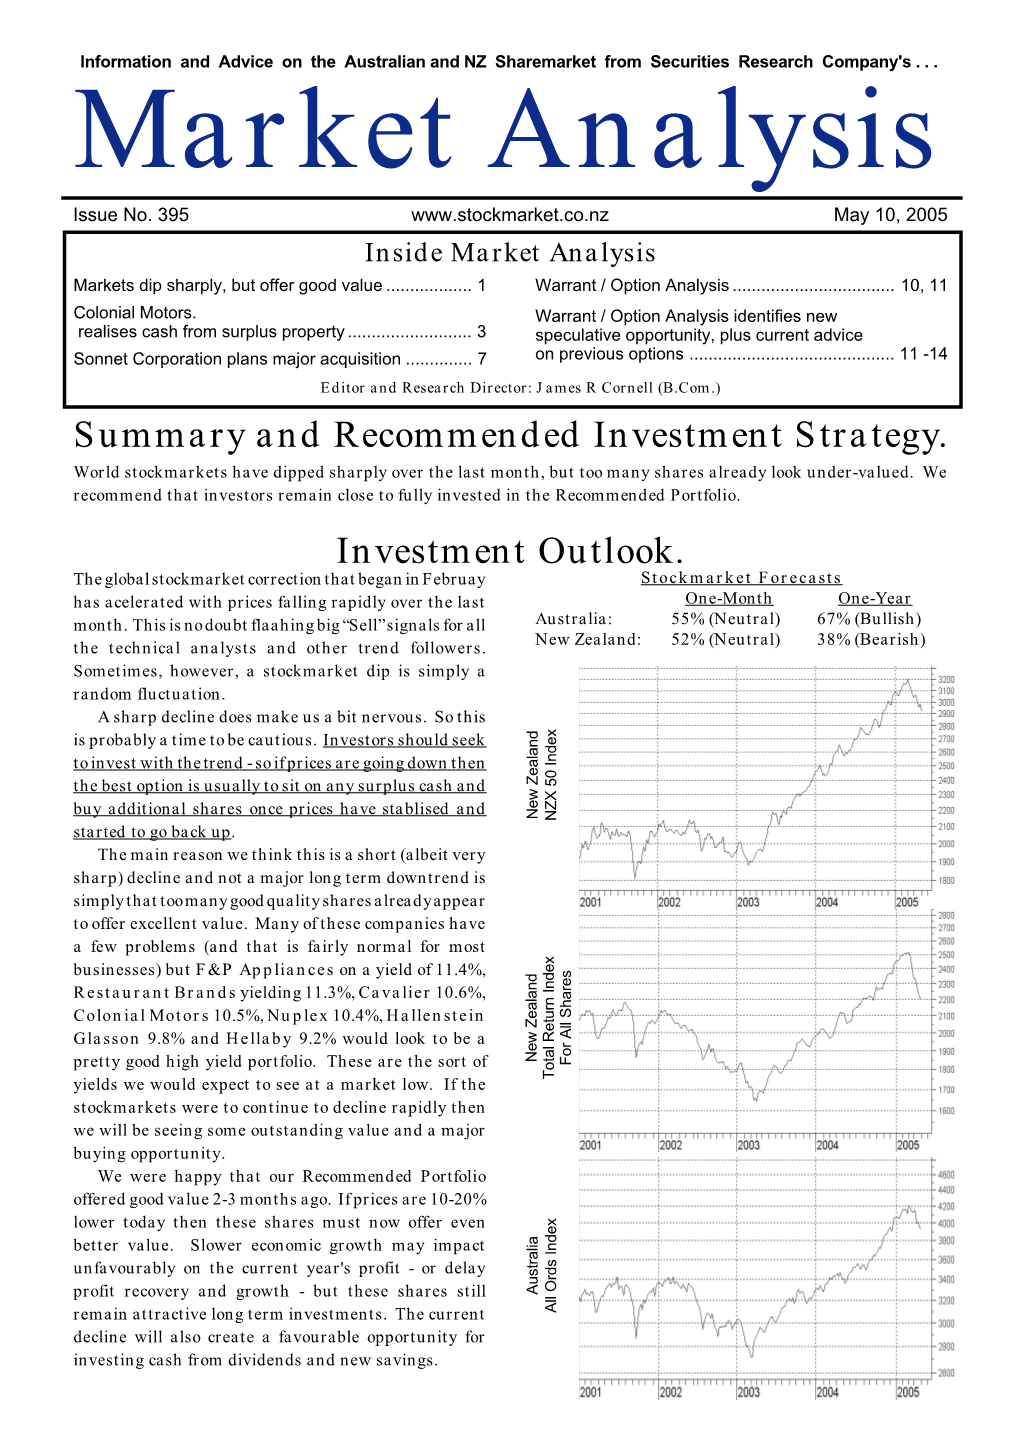 Summary and Recommended Investment Strategy. Investment